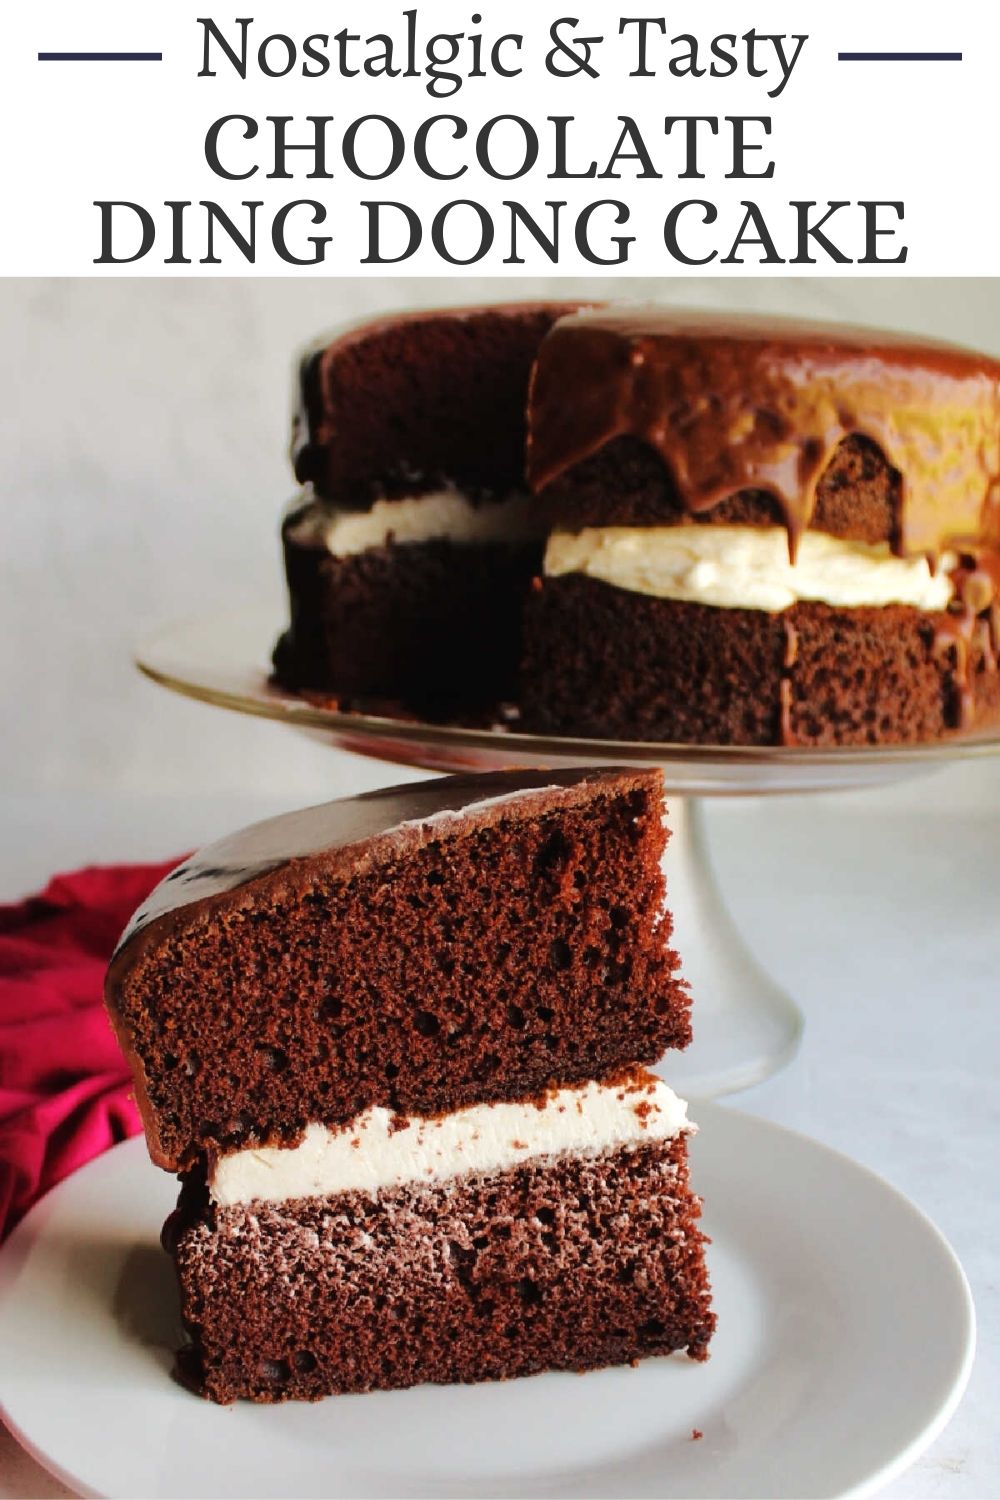 This great recipe combines chocolate cake layers, a glorious cream filling and fudge frosting to make a giant Ding Dong cake. It is the perfect mix of chocolatey flavor and fluffy vanilla filling that is sure to win over any chocolate lover.